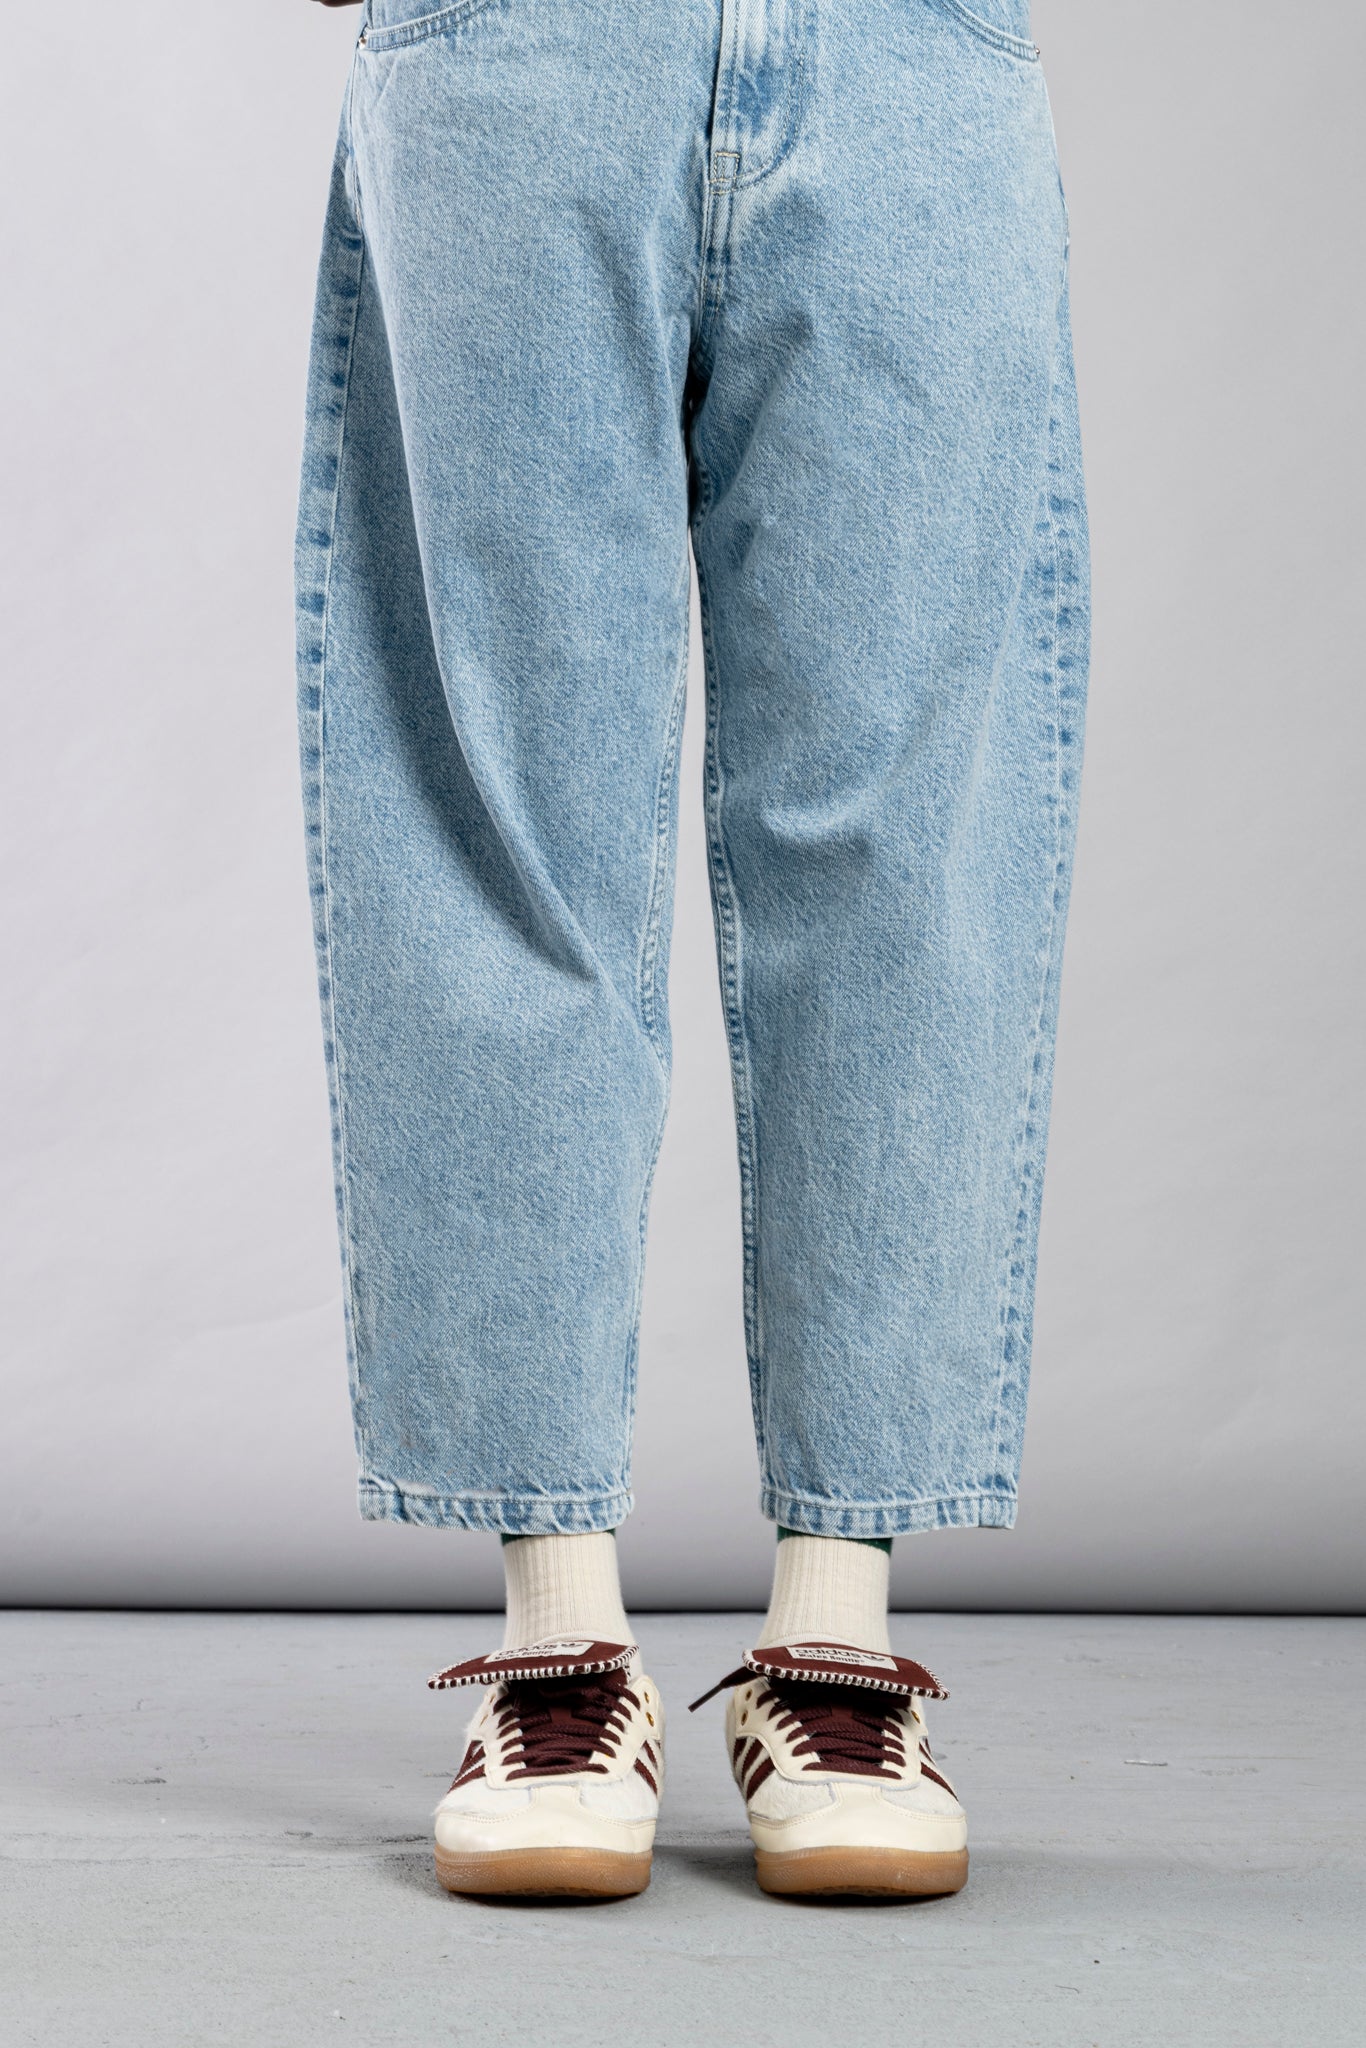 Goodies Sportive - Relaxed Crop Pant